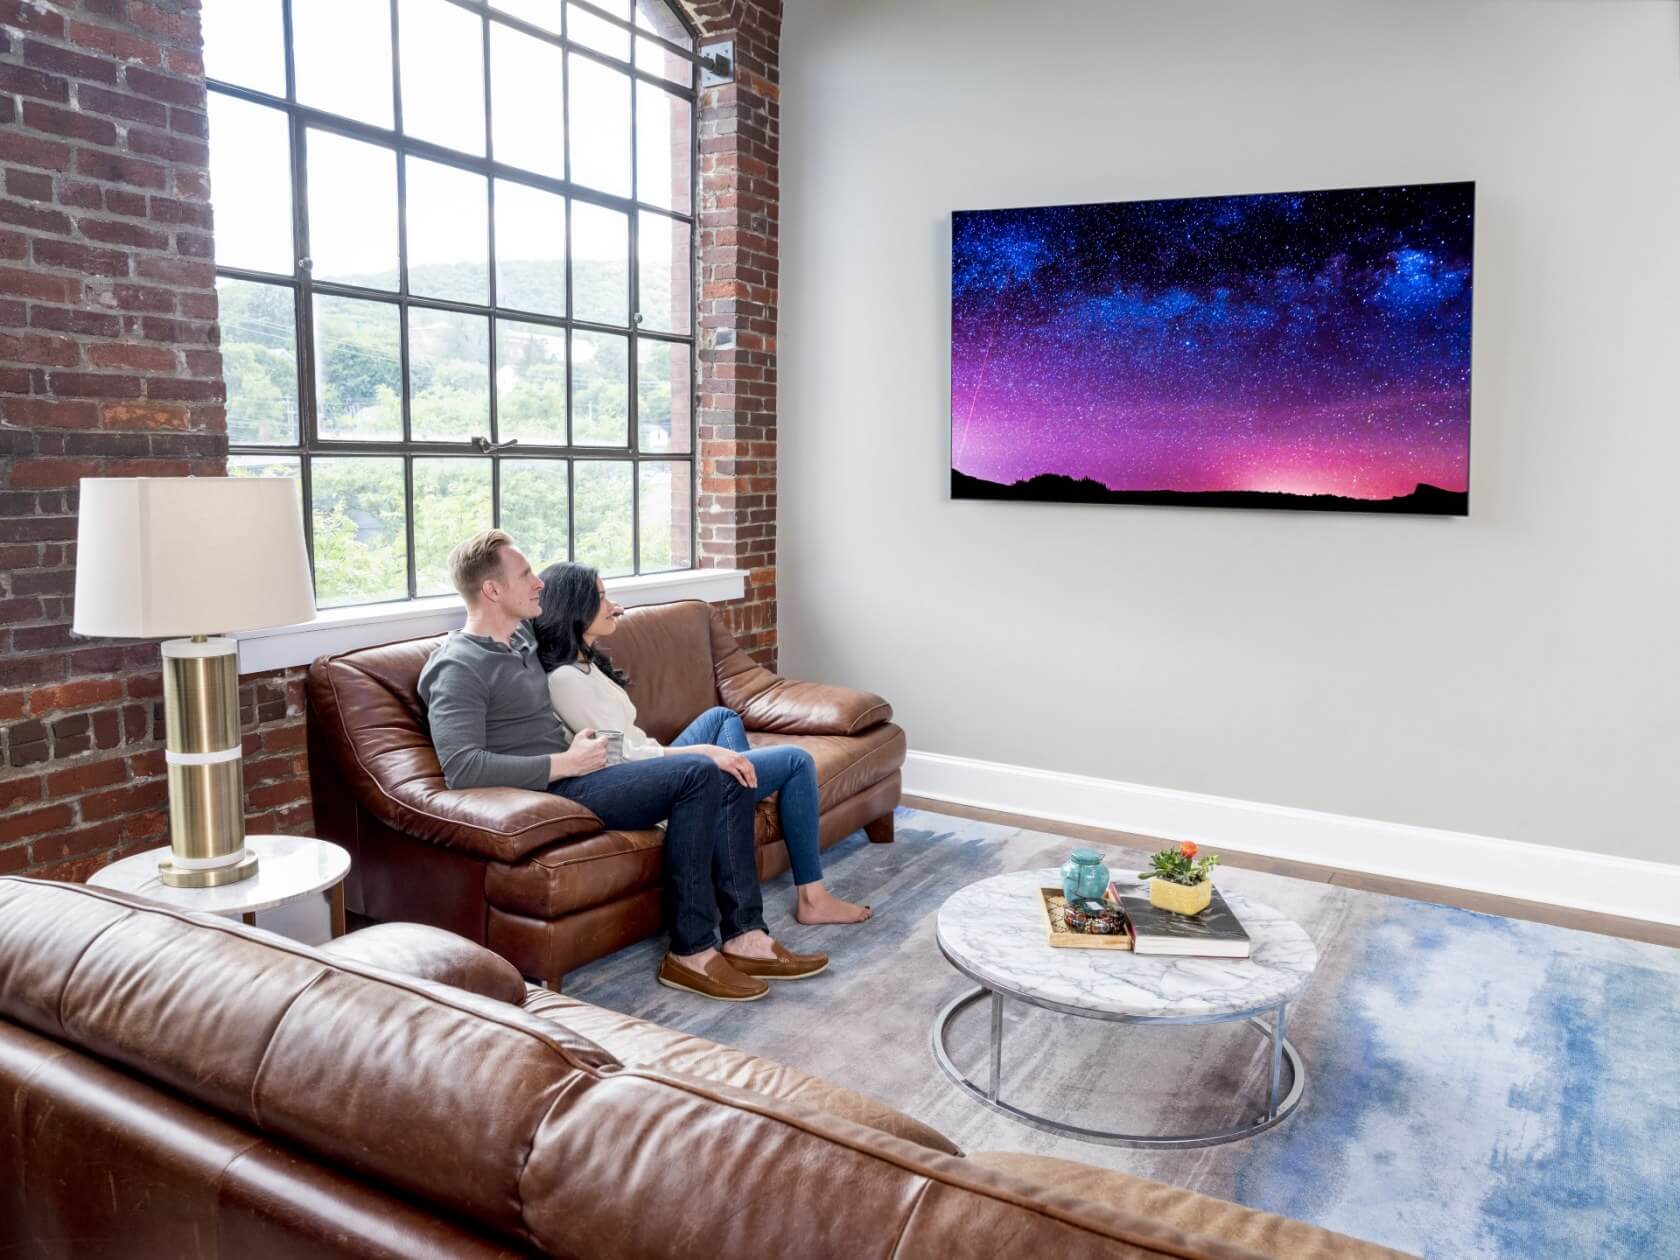 Corning 'Astra Glass' is a new glass substrate for 8K displays and high-performance devices